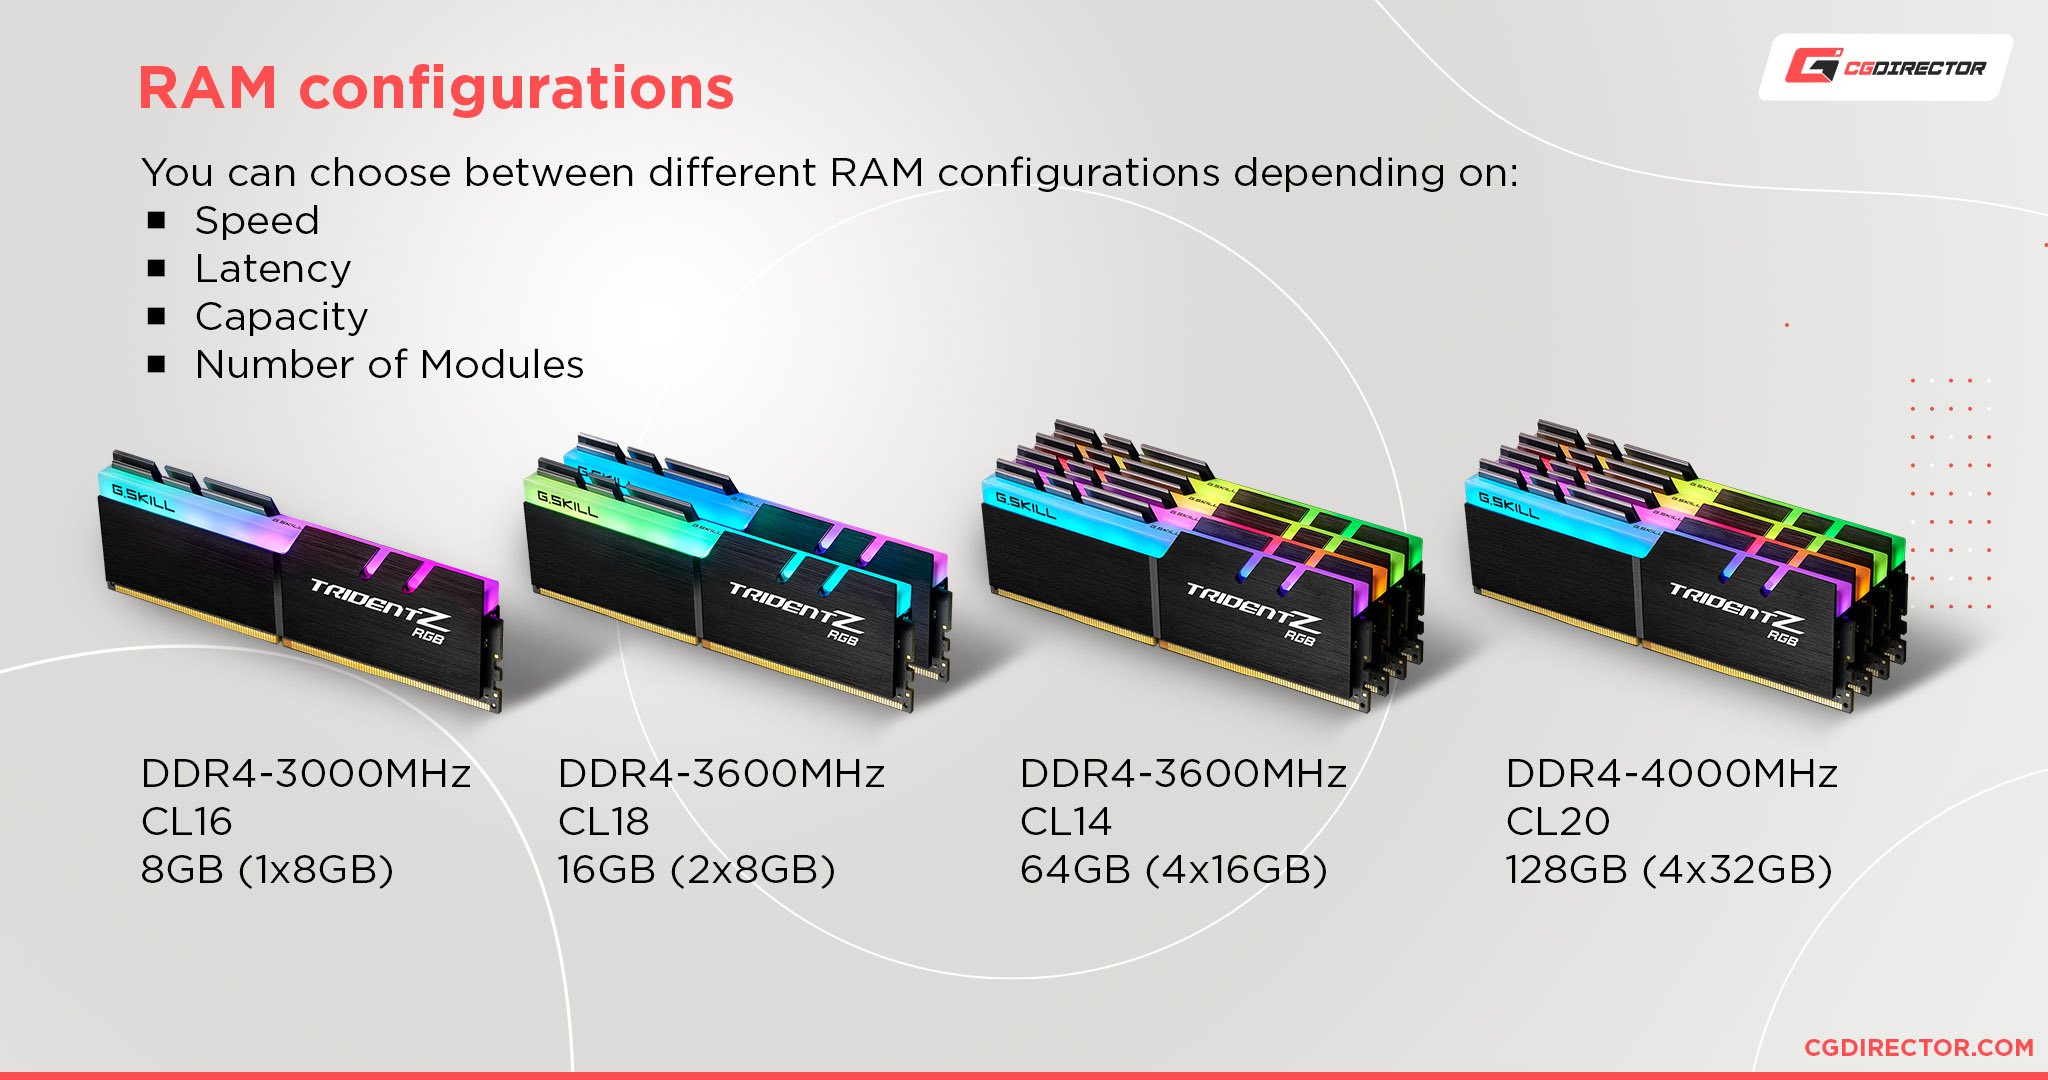 How Much RAM (Memory) Do You Need? Different Workloads explored